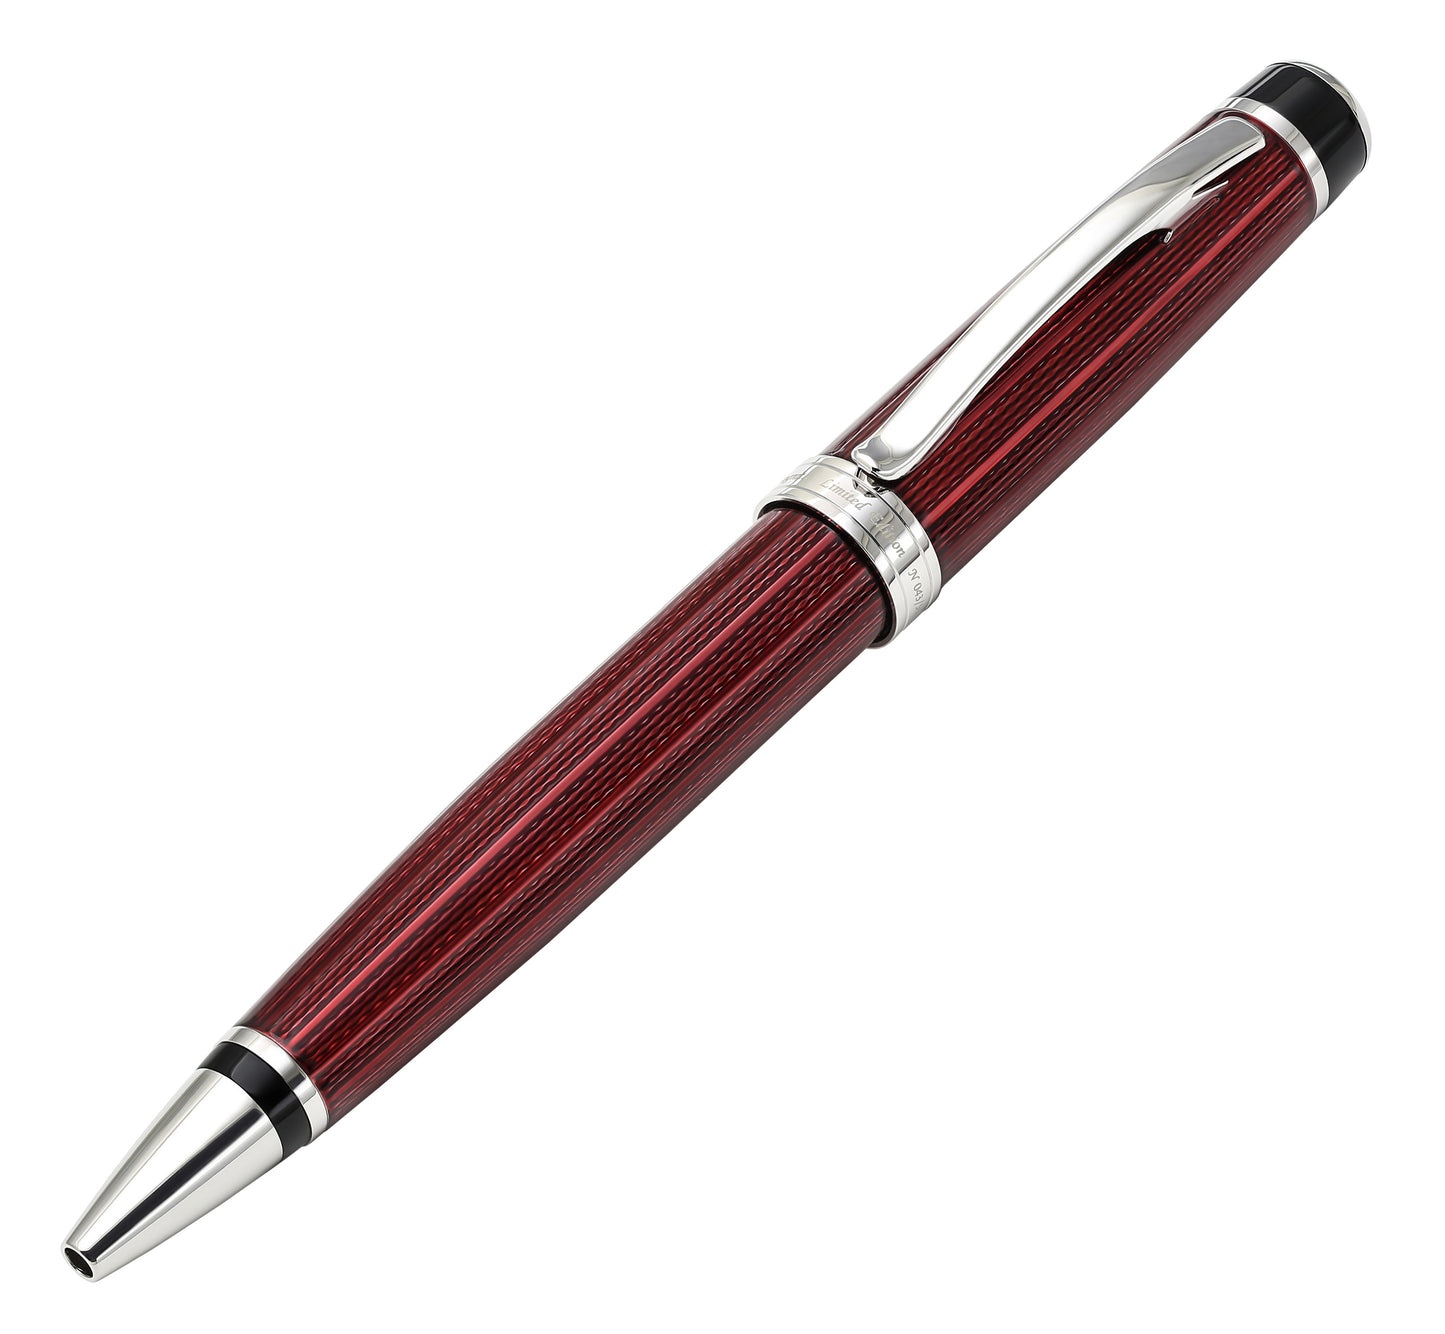 Xezo - Angled view of the side of the Incognito Burgundy B ballpoint pen